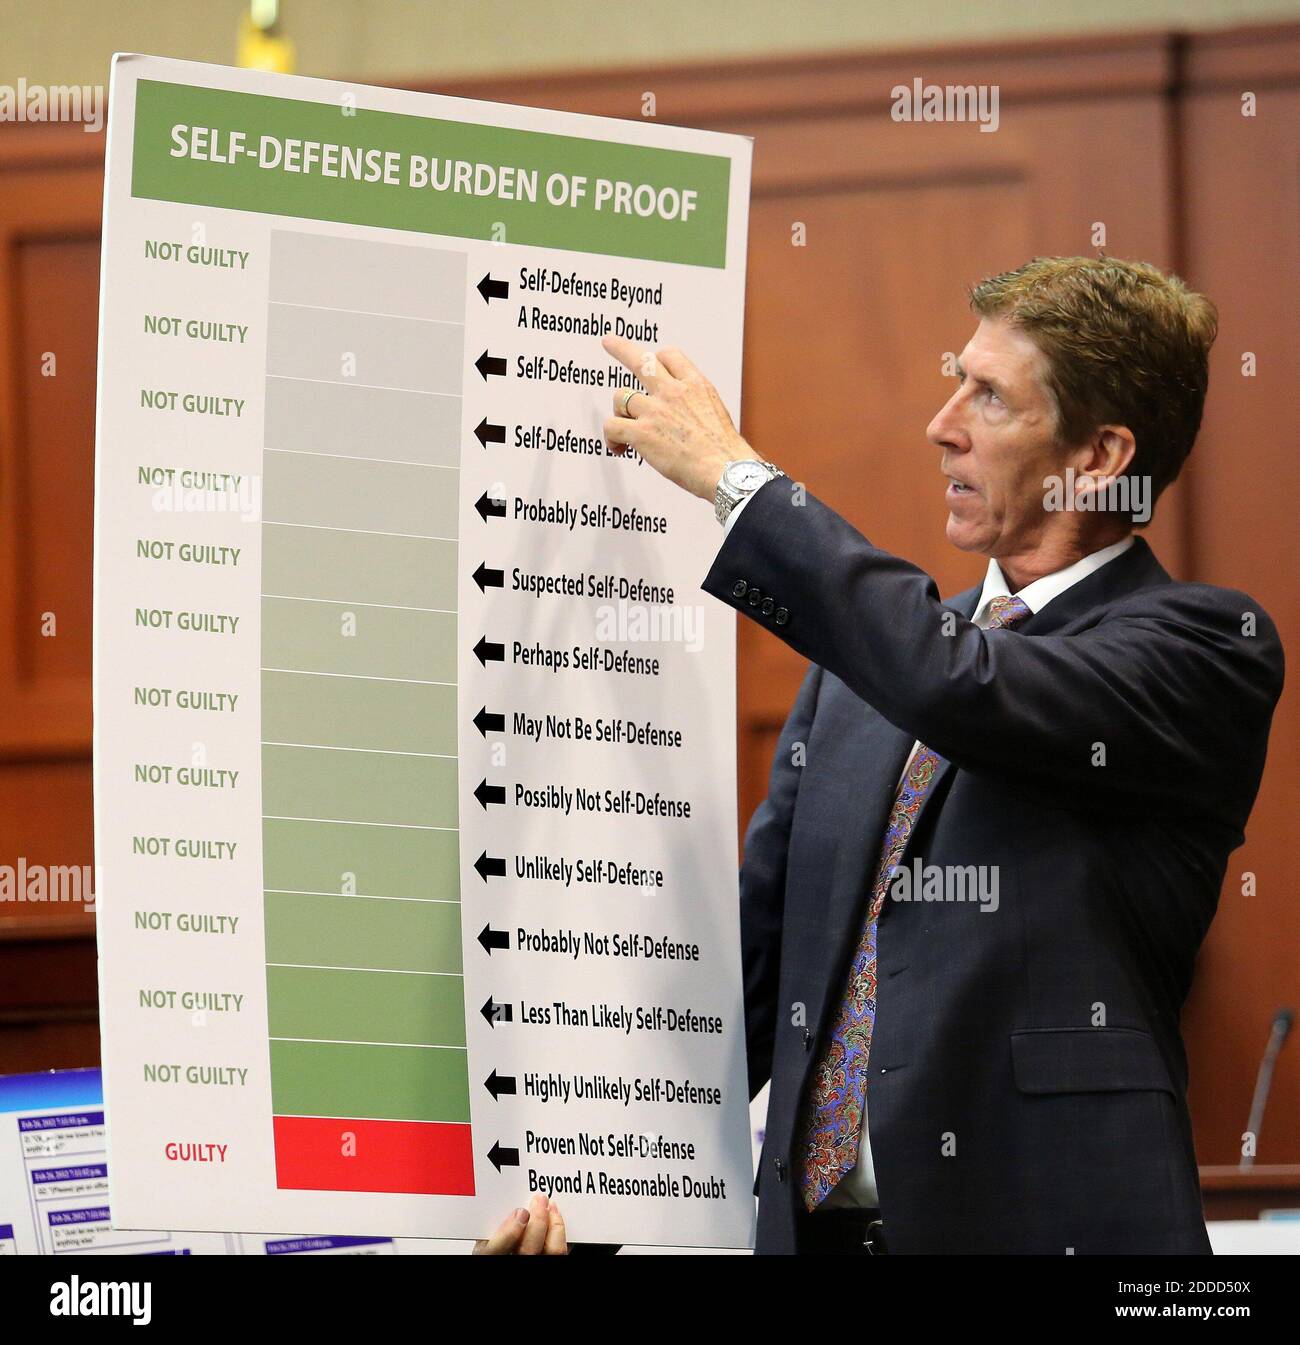 NO FILM, NO VIDEO, NO TV, NO DOCUMENTARY - Defense counsel Mark O'Mara shows a chart to the jury during closing arguments in George Zimmerman's trial in Seminole circuit court in Sanford, Florida, USA on Friday, July 12, 2013. Zimmerman has been charged with second-degree murder for the 2012 shooting death of Trayvon Martin. Photo Pool by Joe Burbank/Orlando Sentinel/MCT/ABACAPRESS.COM Stock Photo